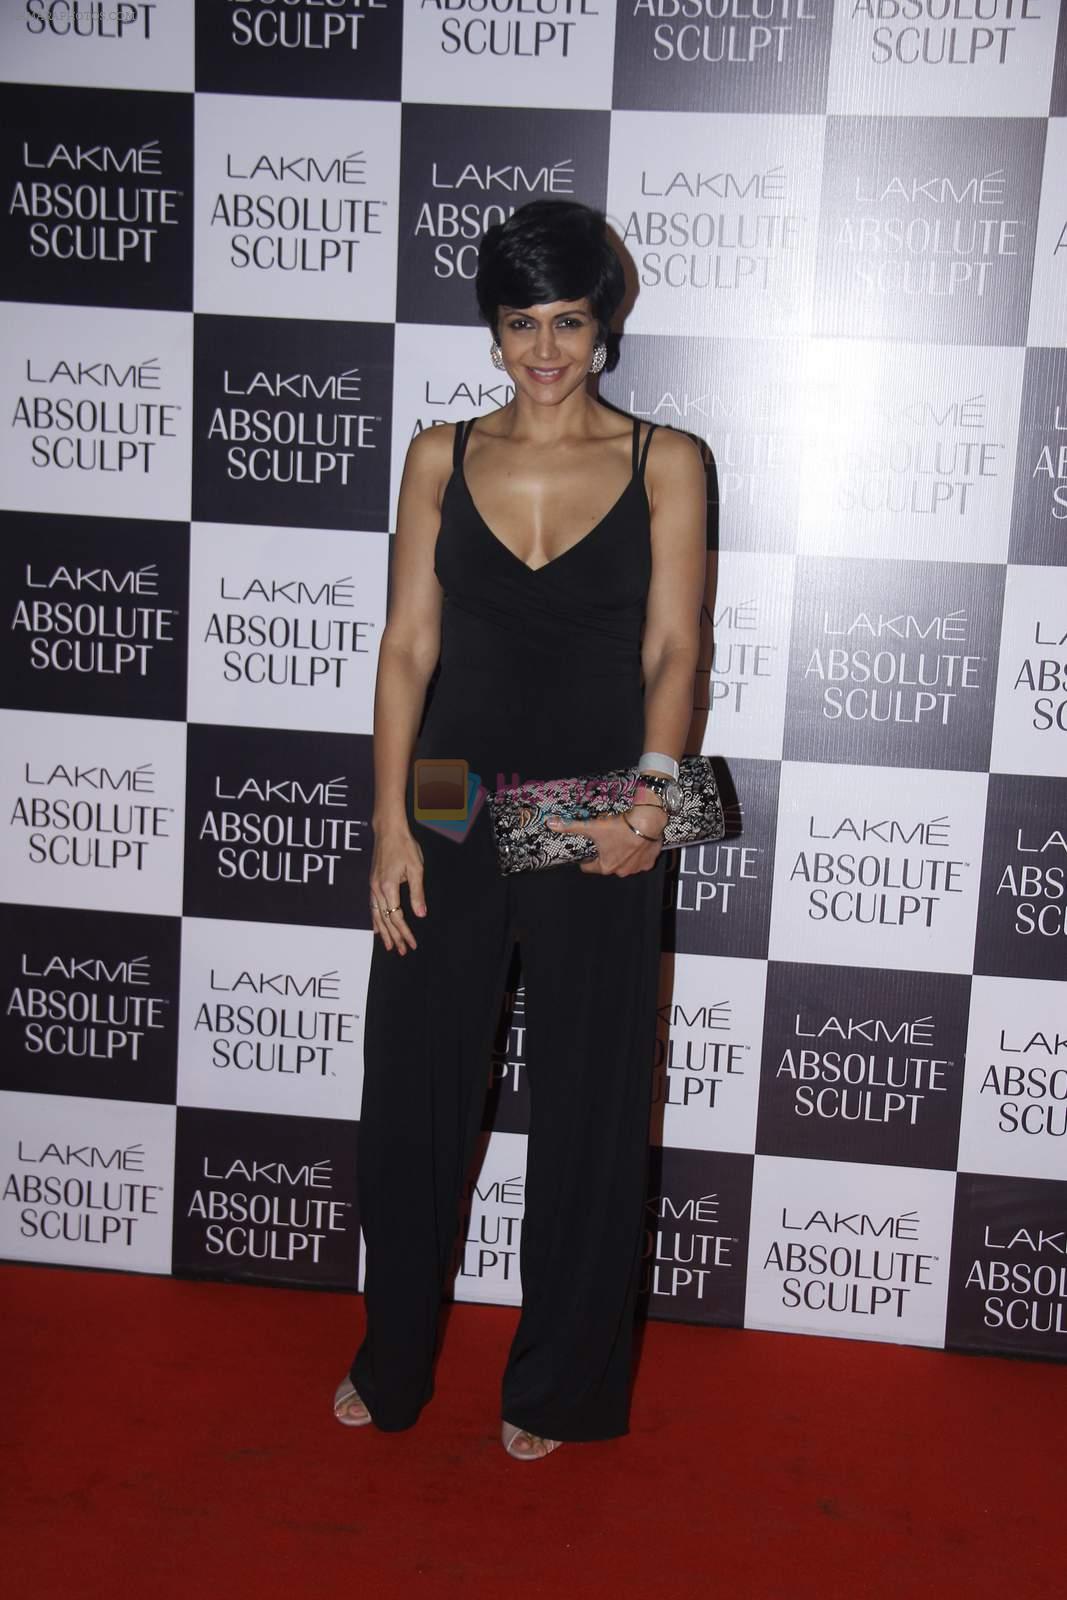 Mandira bedi at the grand finale of Lakme Fashion Week 2015 on 30th Aug 2015